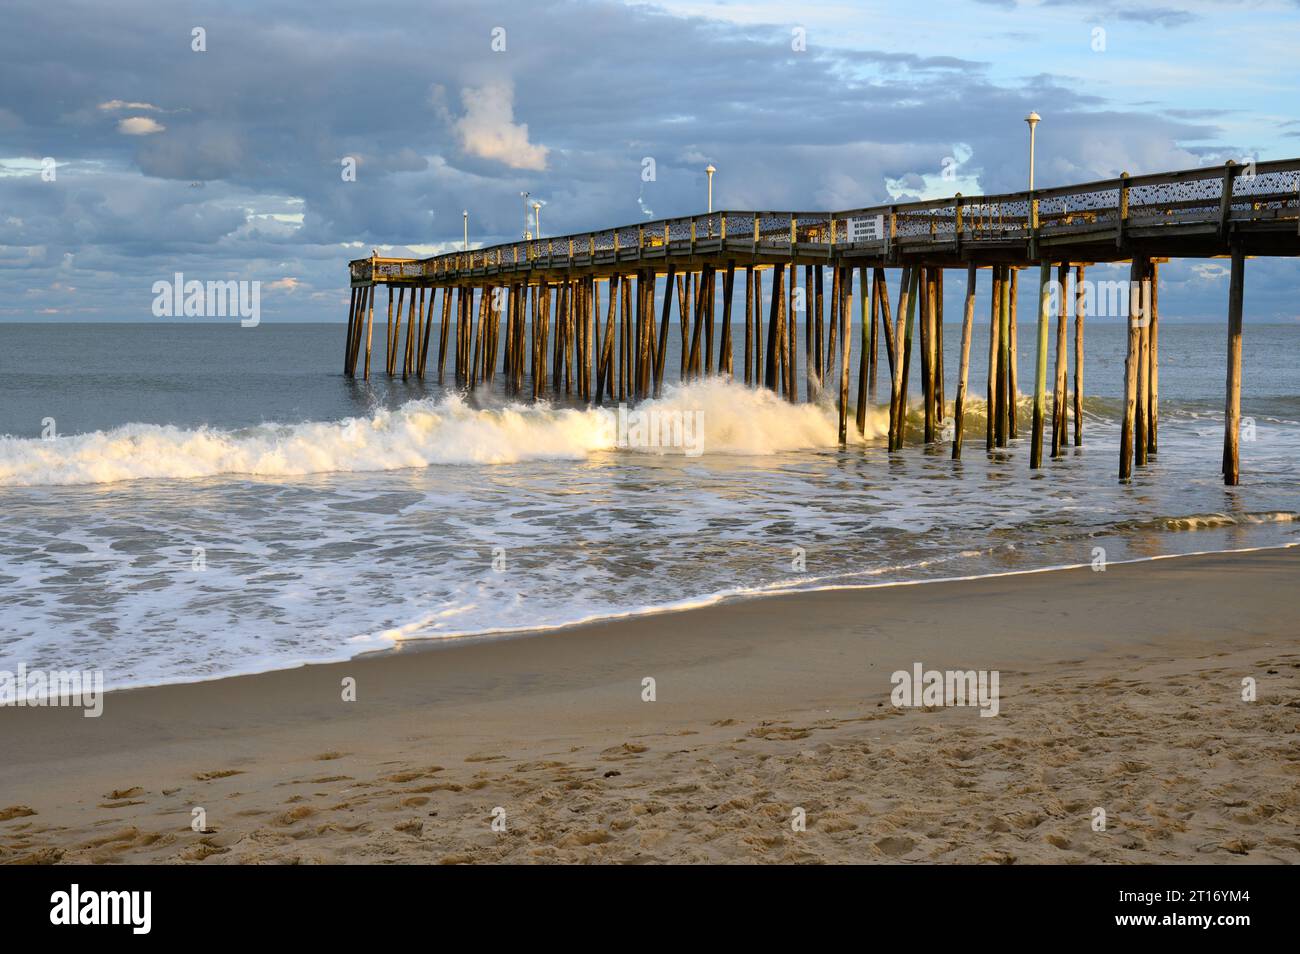 The Pier at Ocean City, Maryland, USA at sunset during late fall. Stock Photo